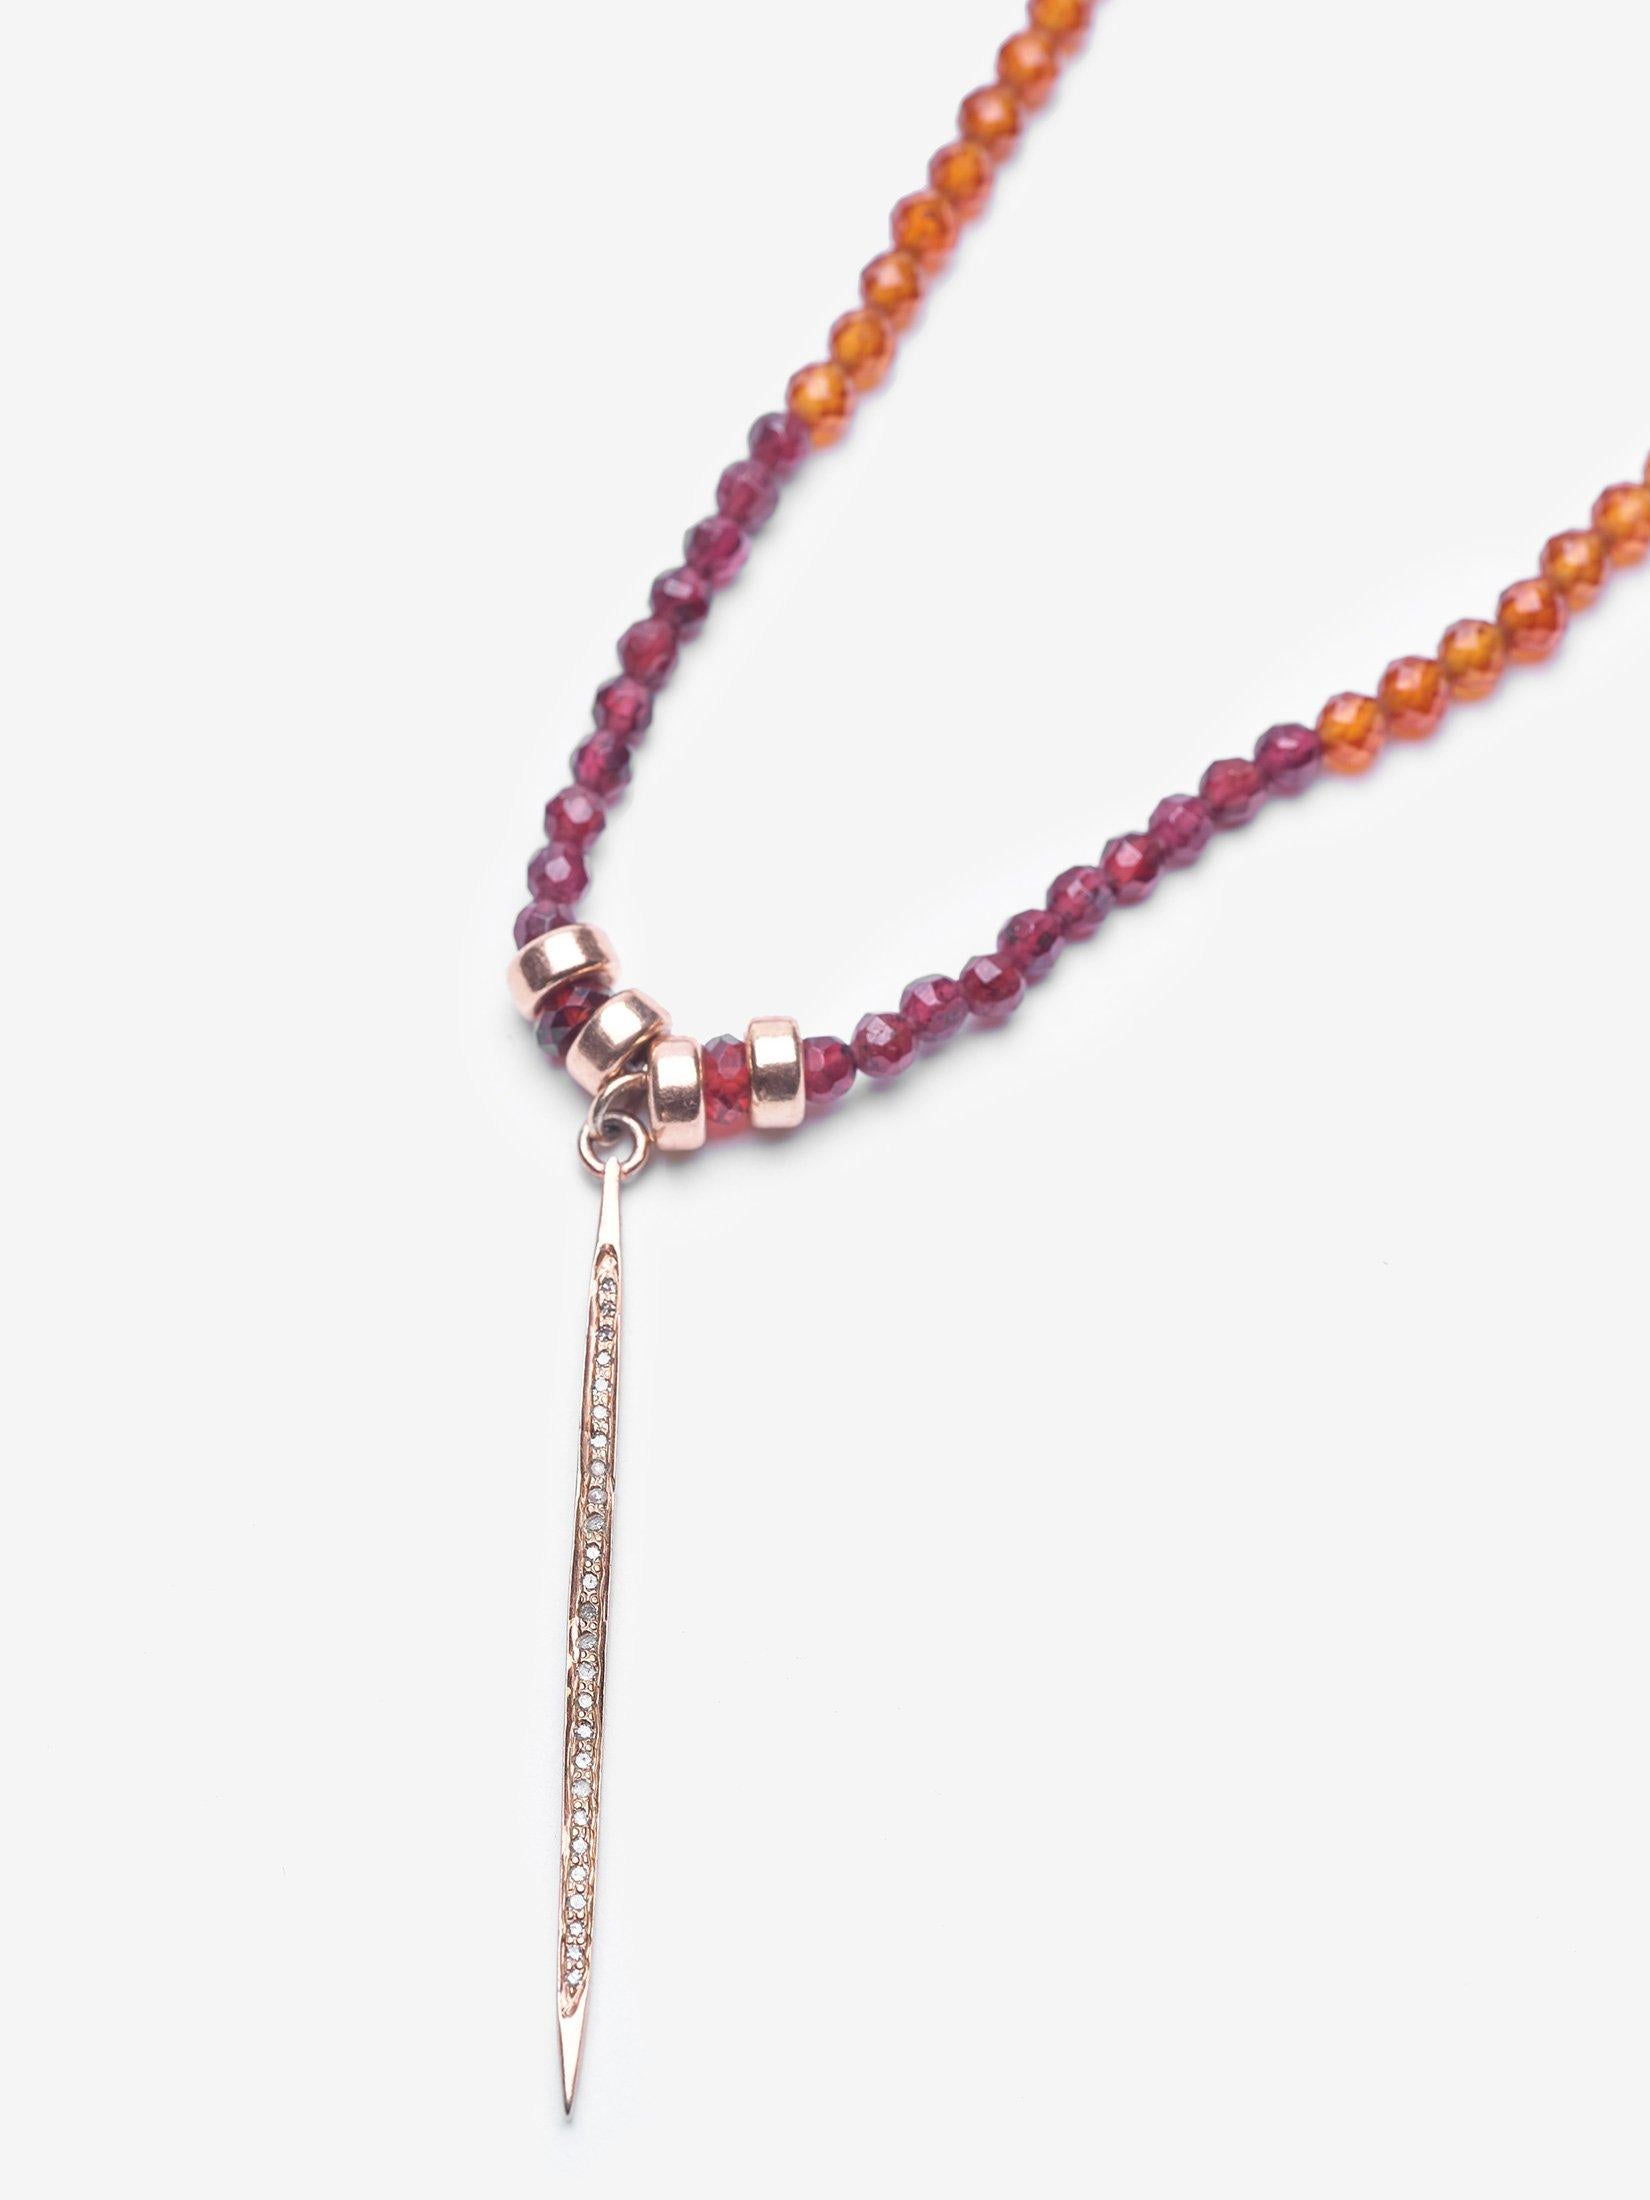 Story Behind The Jewelry
A garnet and pavé diamond necklace is a must-have in your jewelry collection. The warm autumn stones are accented with 14K Gold.  The variations of garnet and citrine are incredible purifiers for the body.  The necklace is